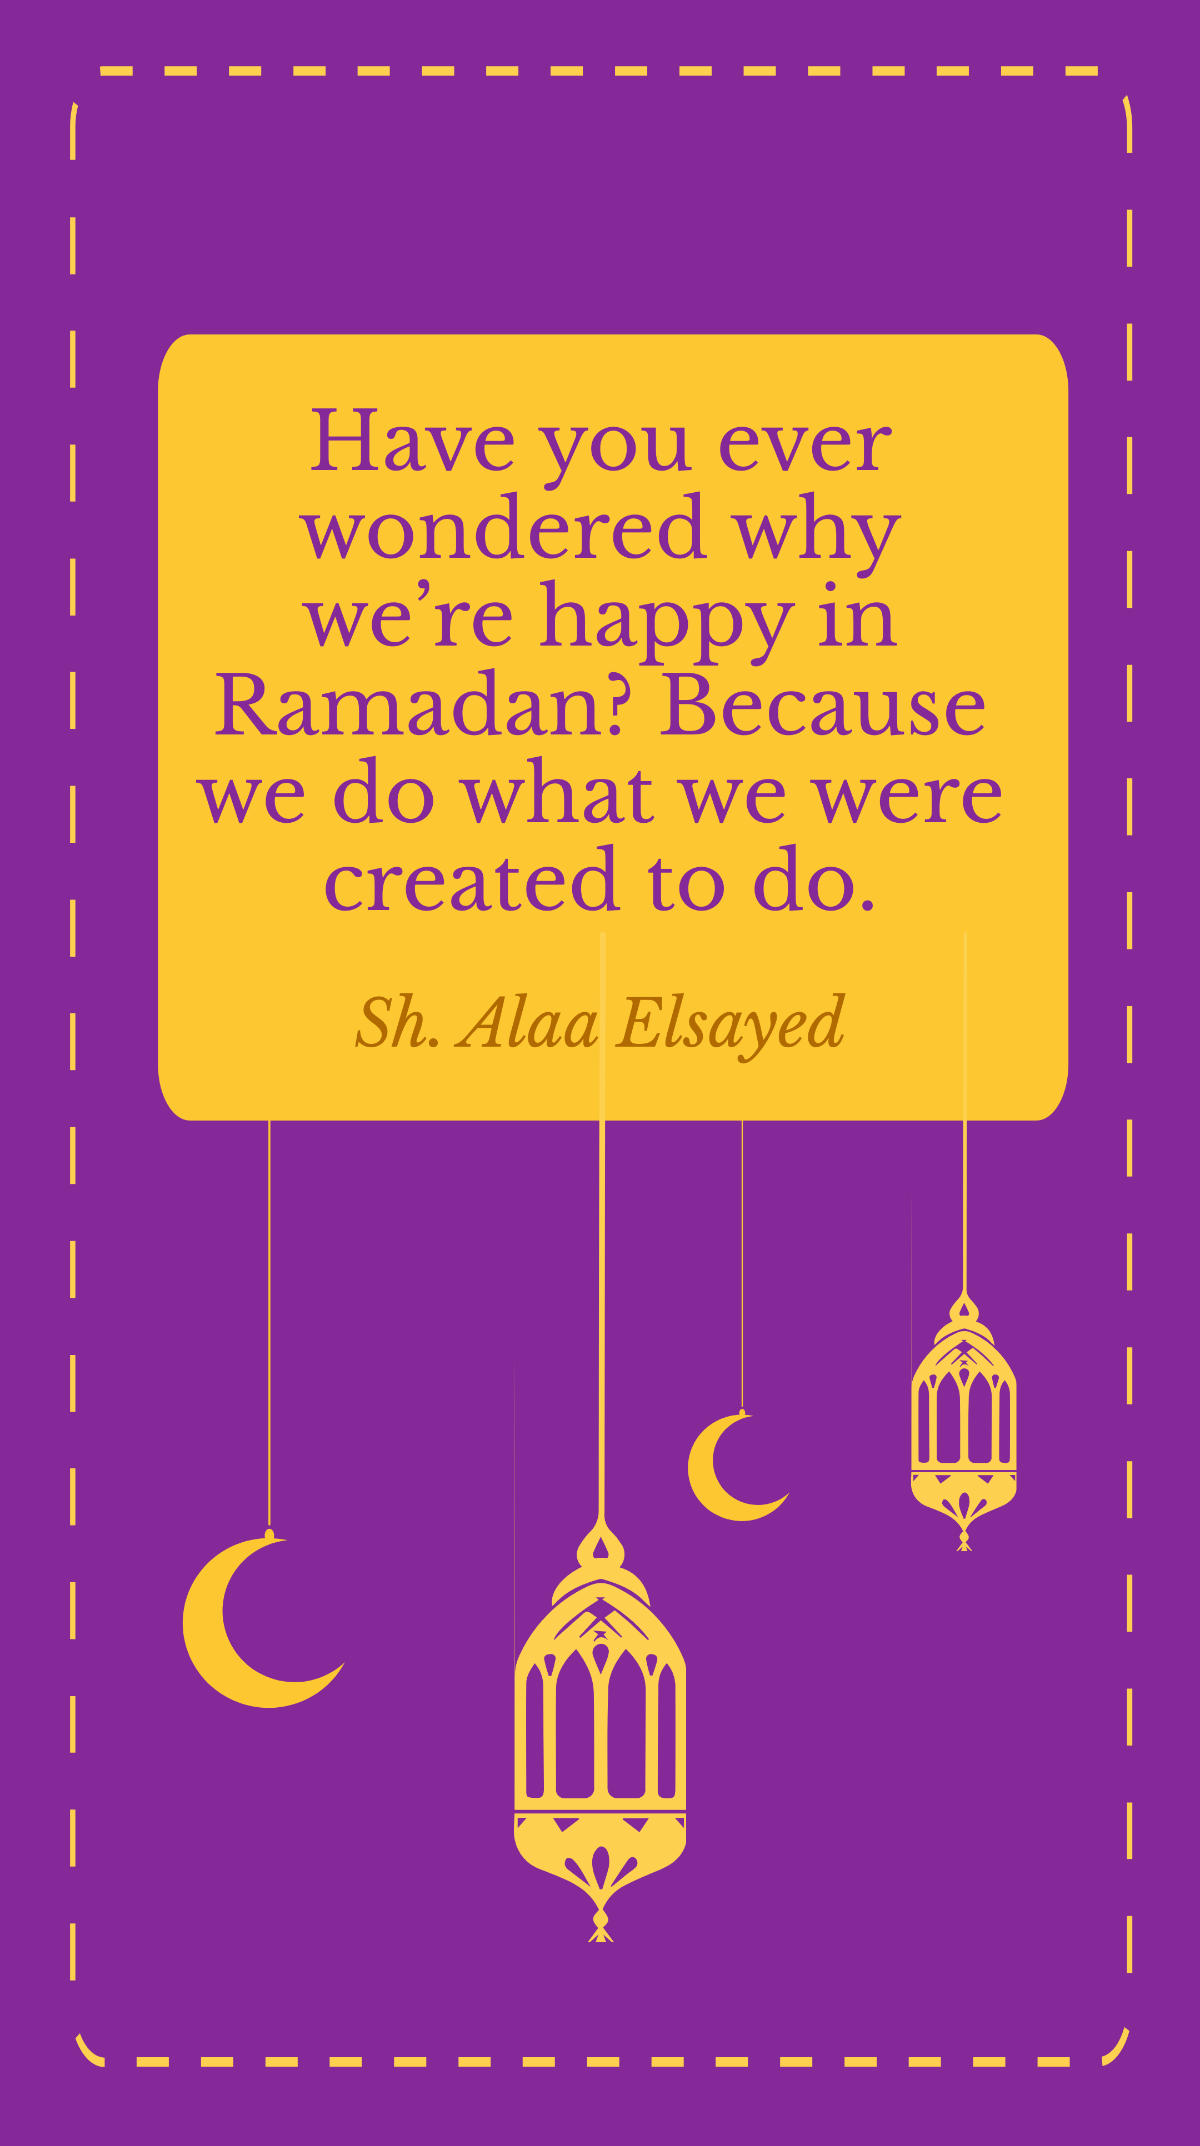 Sh. Alaa Elsayed - Have you ever wondered why we’re happy in Ramadan? Because we do what we were created to do. Template